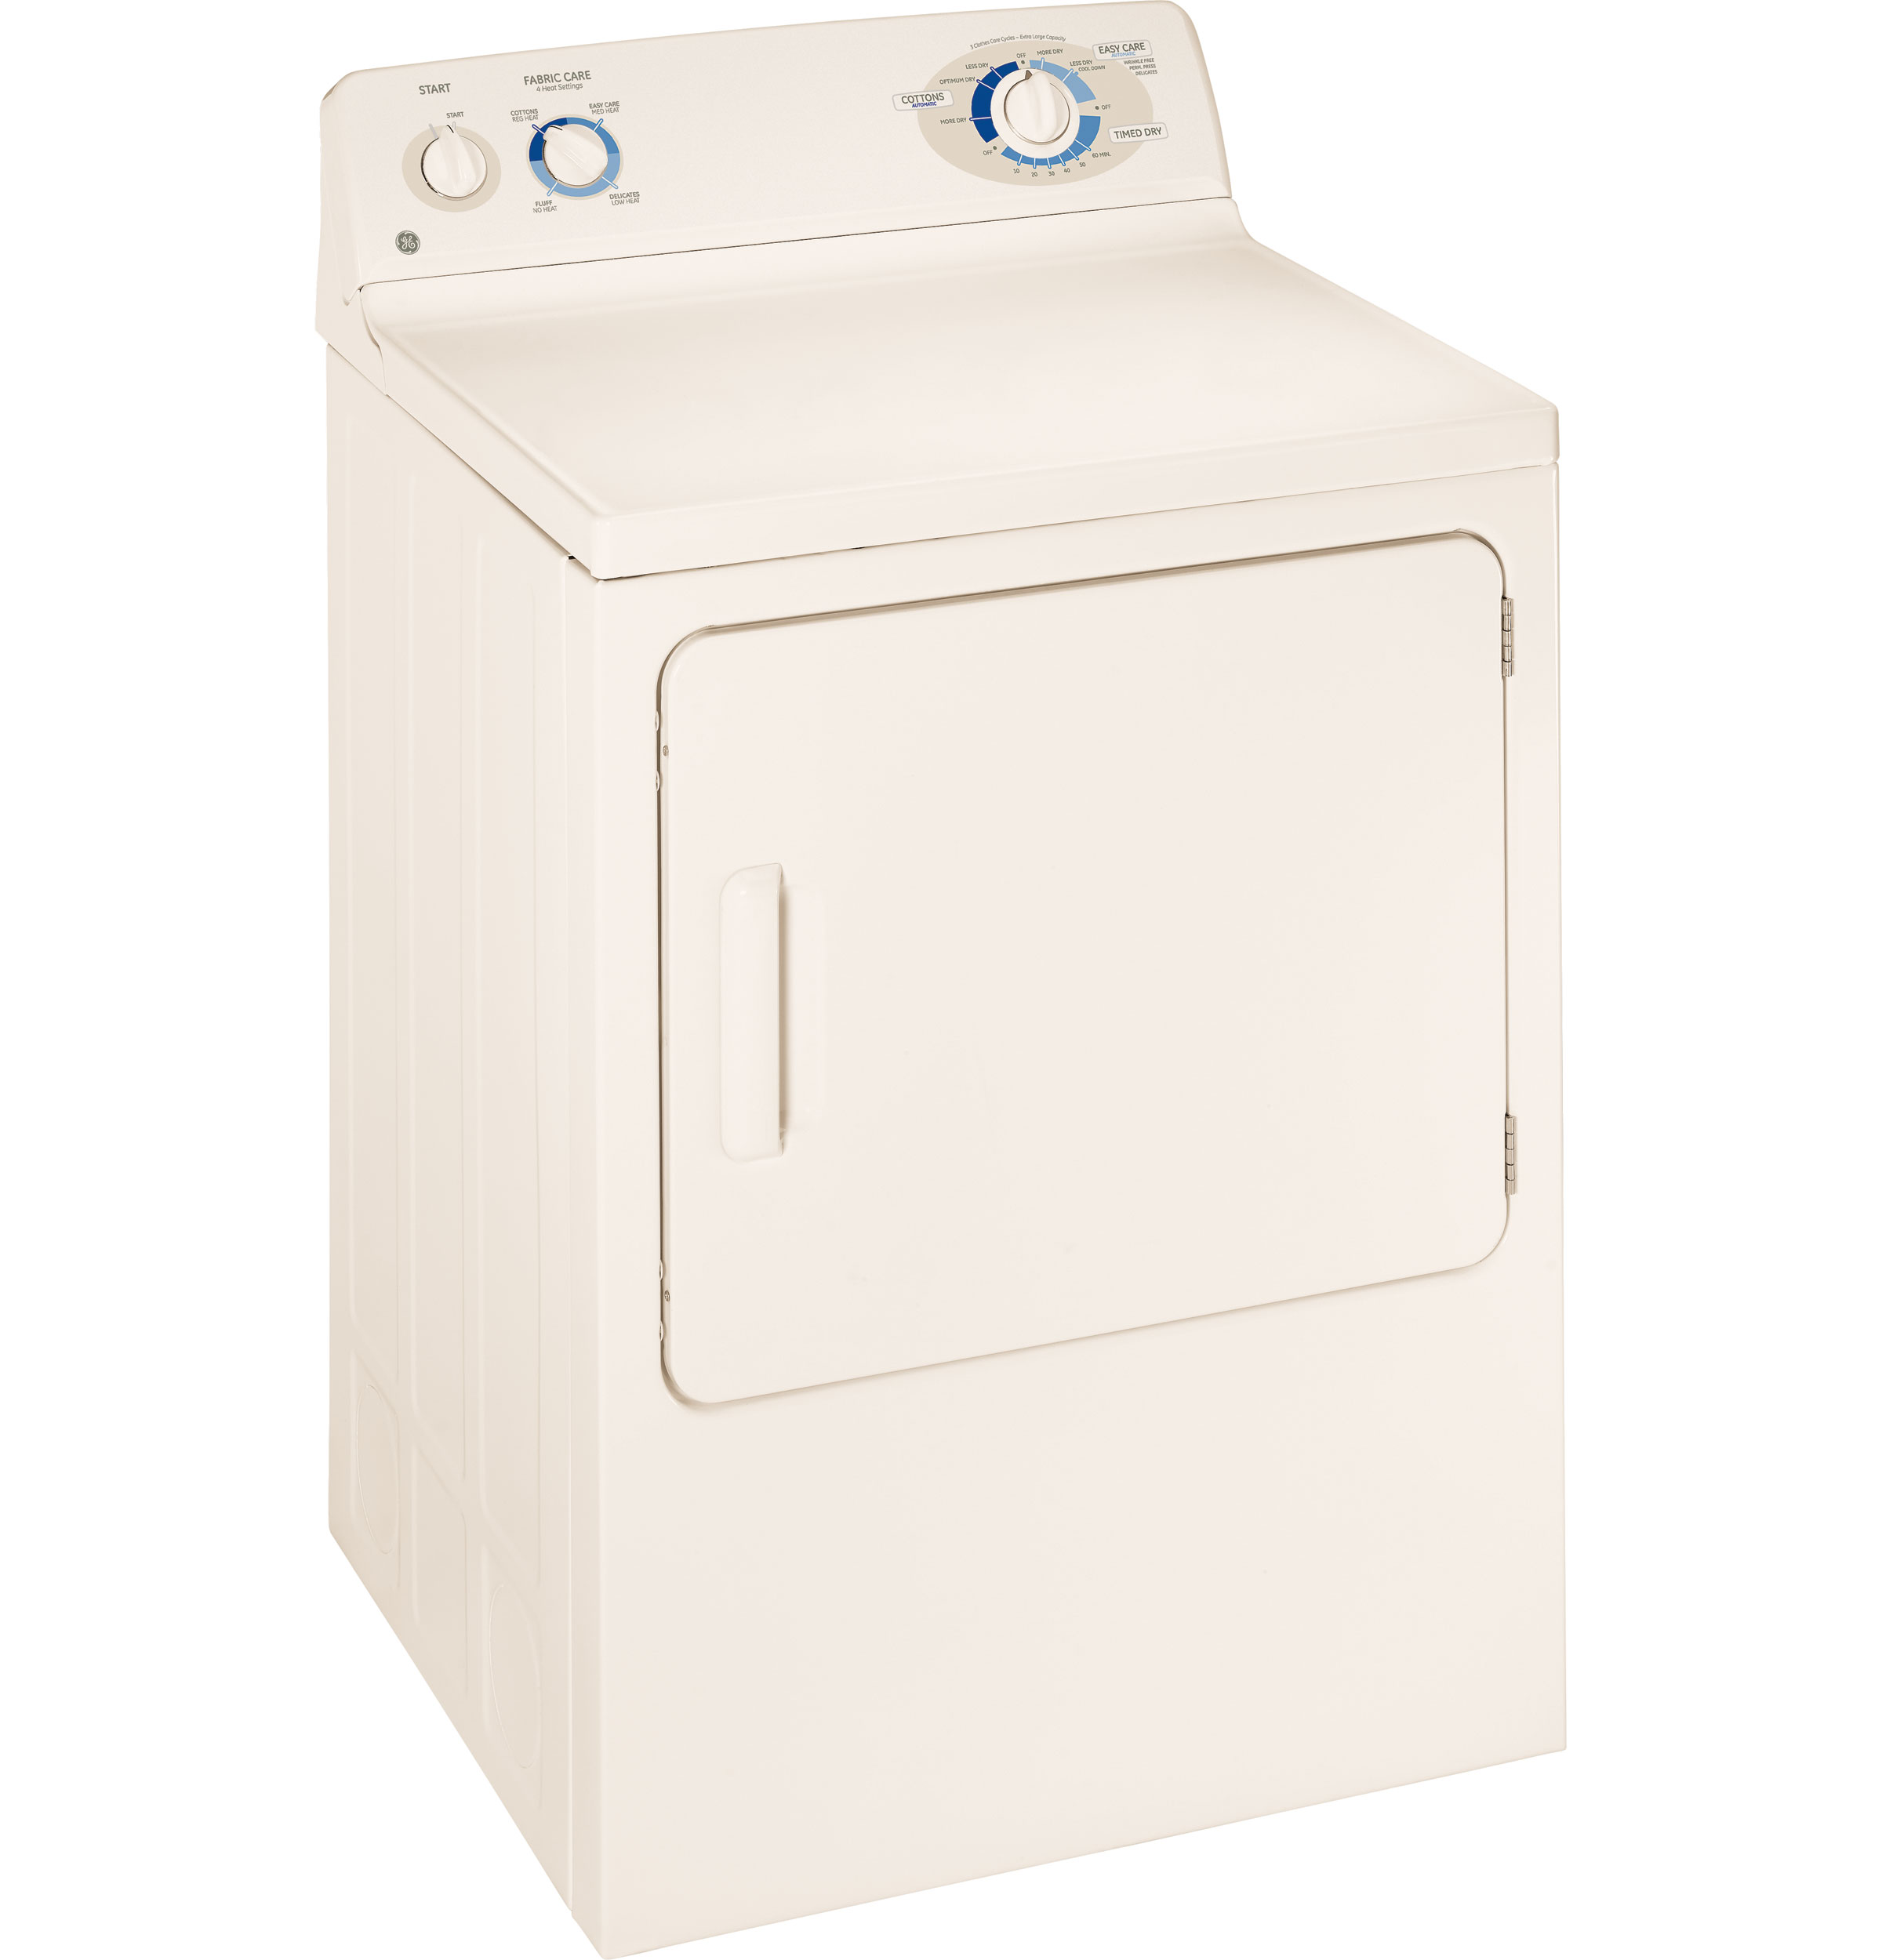 GE® 6.0 Cu. Ft. Extra-Large Capacity Electric Dryer